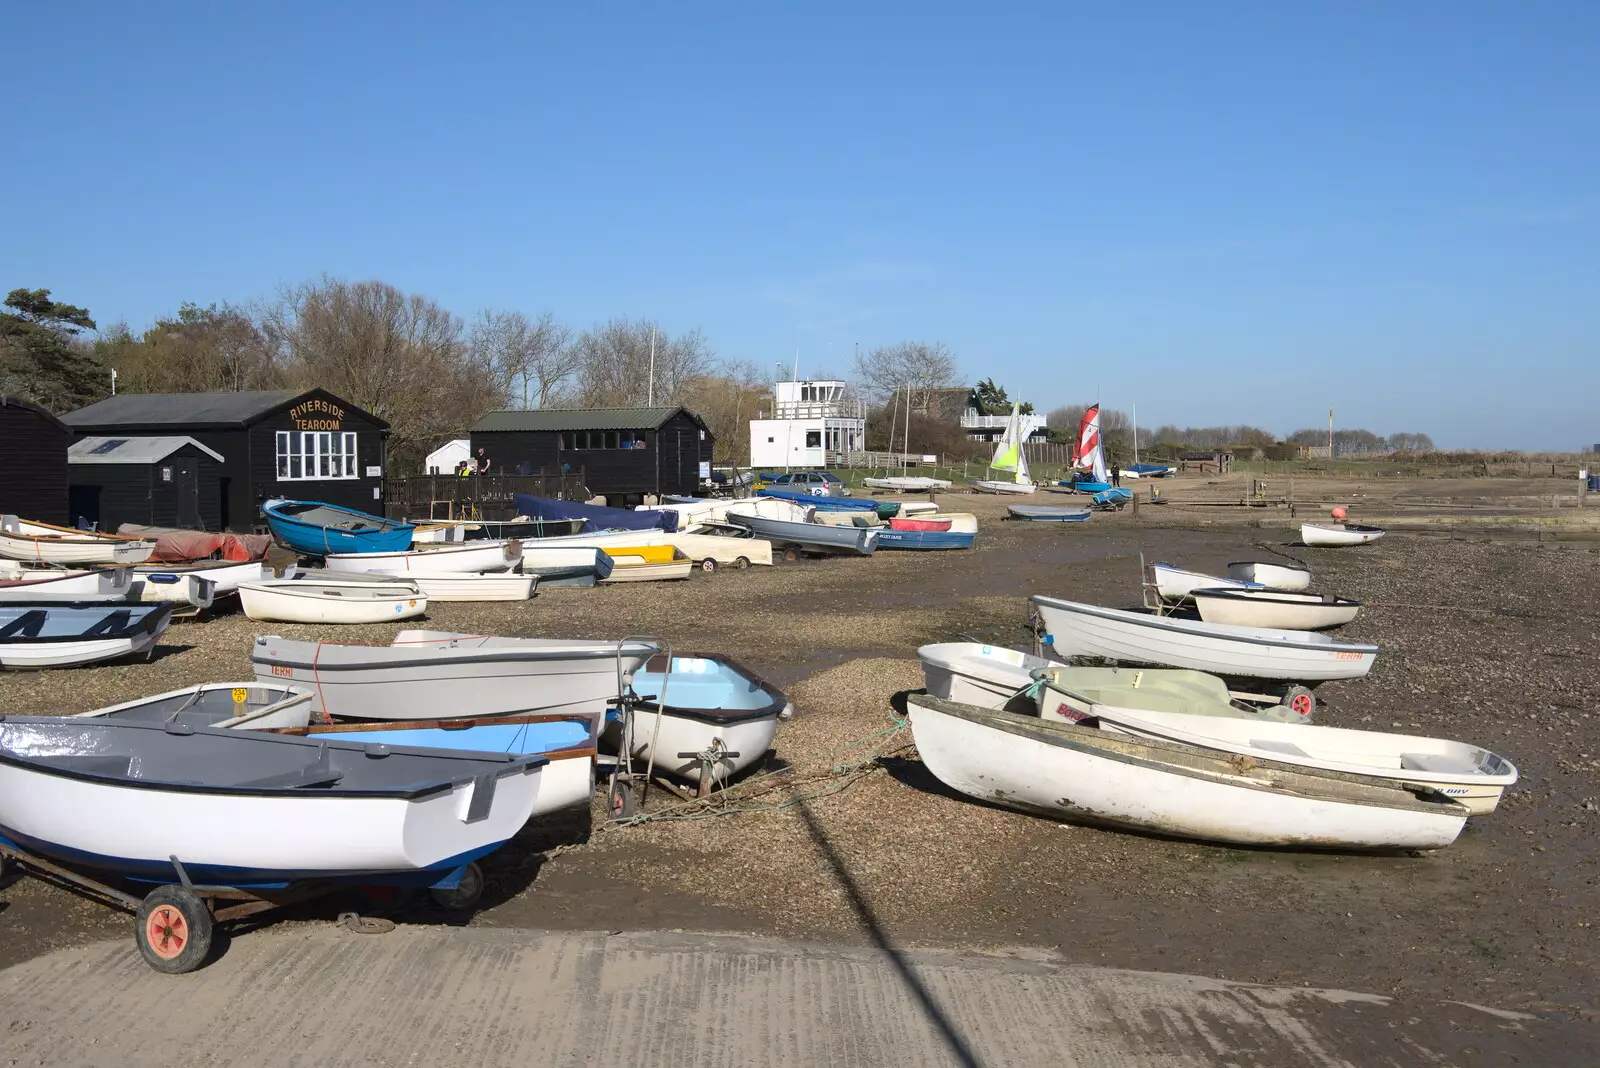 Boats in the boatyard, from A Trip to Orford Castle, Orford, Suffolk - 26th February 2022